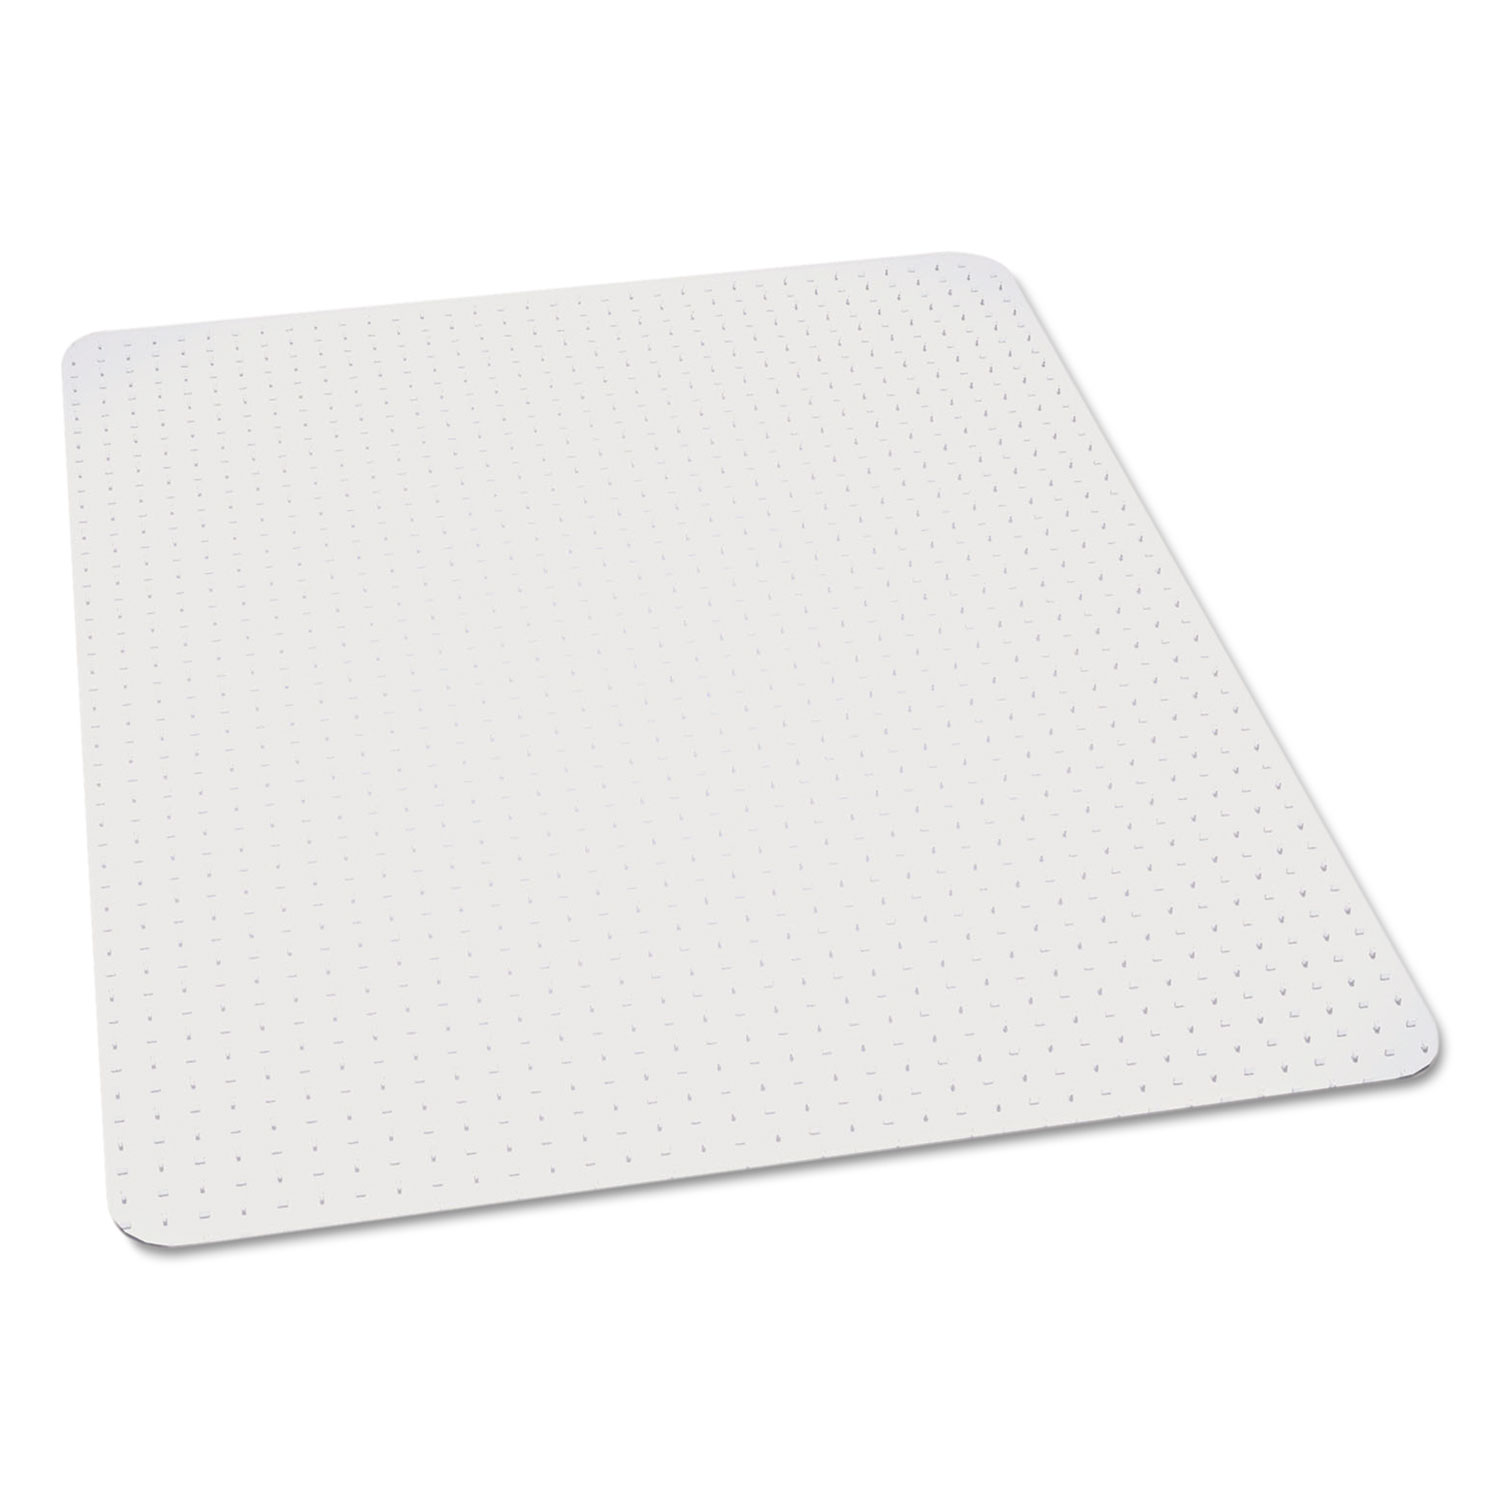 36 x 44 Rectangle Chair Mat, Task Series AnchorBar for Carpet up to 1/8